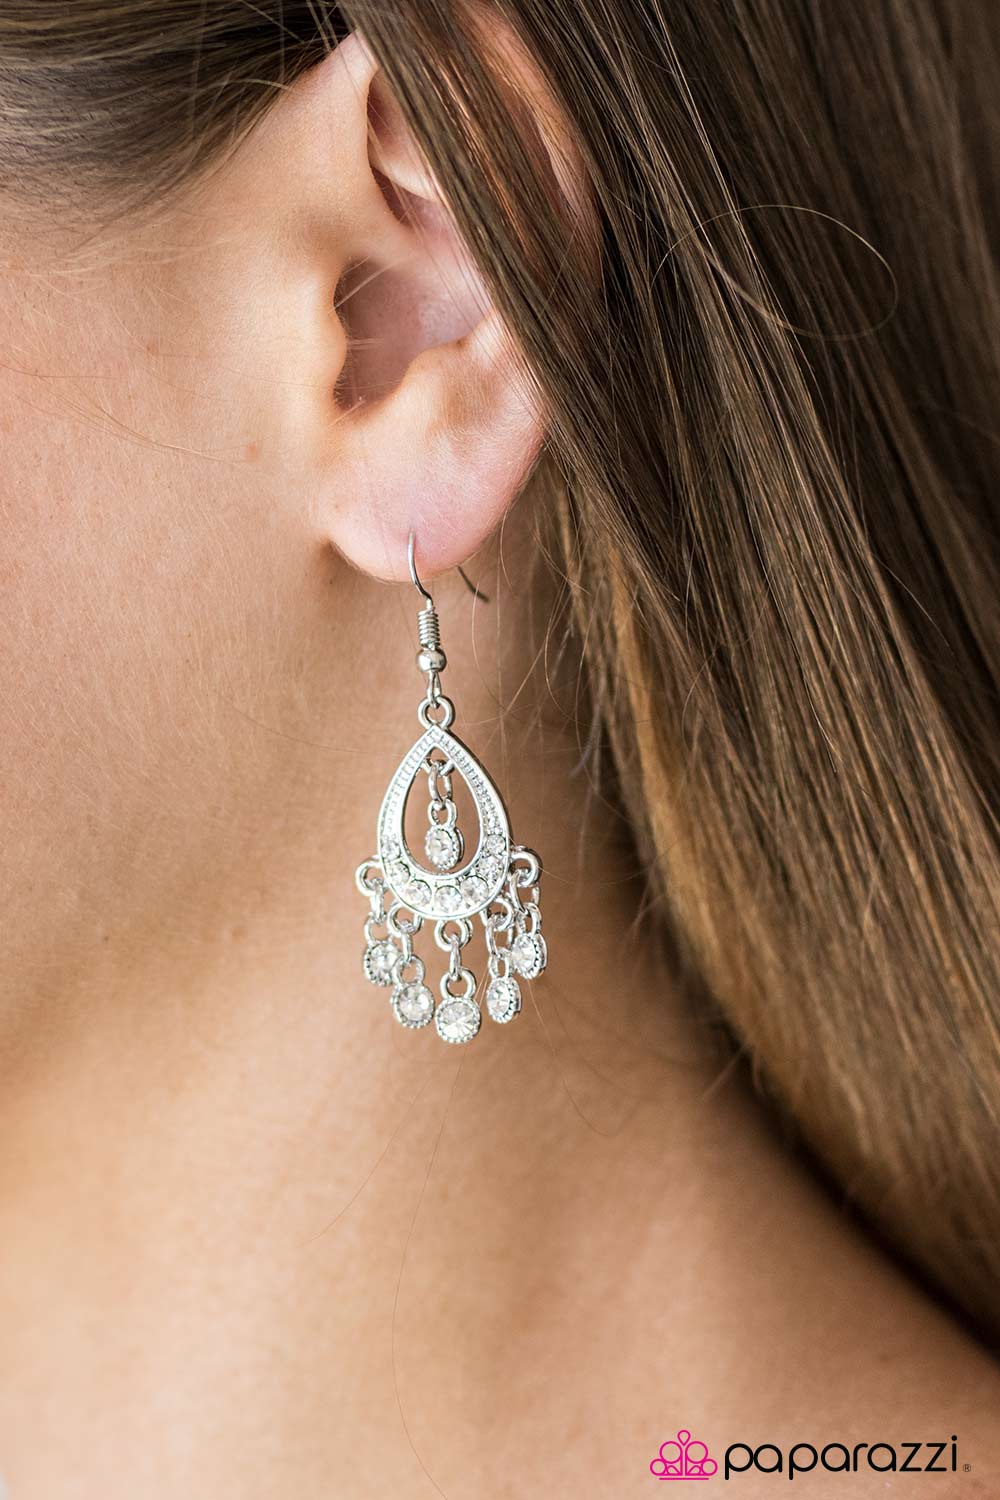 Catch Some Sparkle - White - Paparazzi earrings